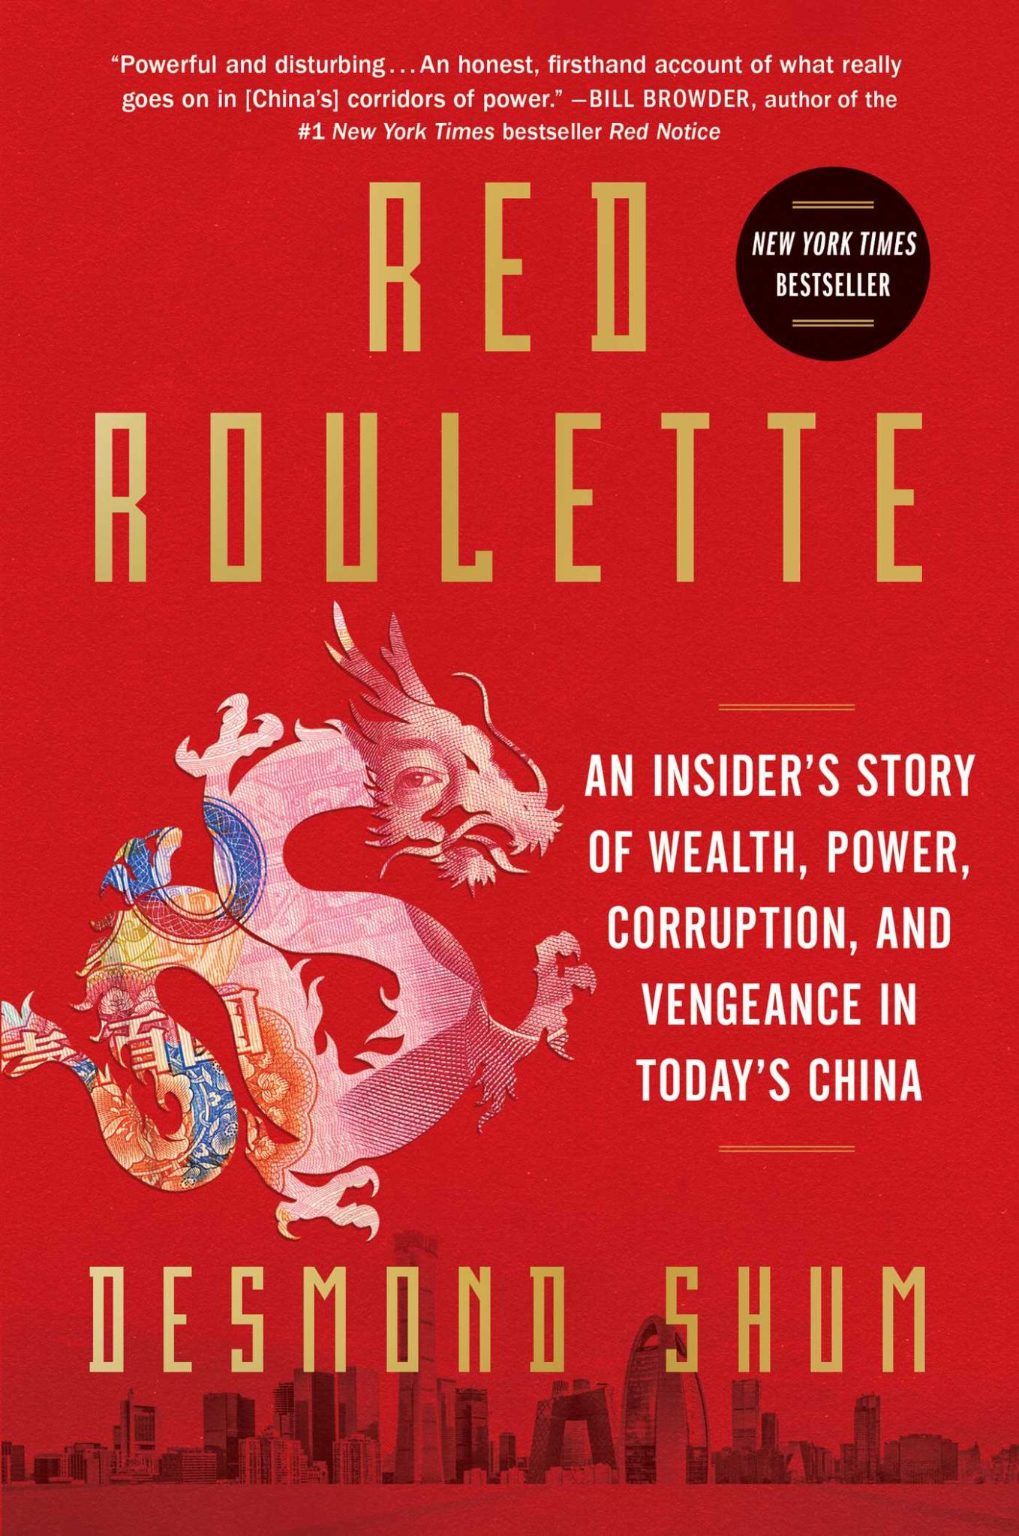 RED ROULETTE: An Insider's Story of today's China